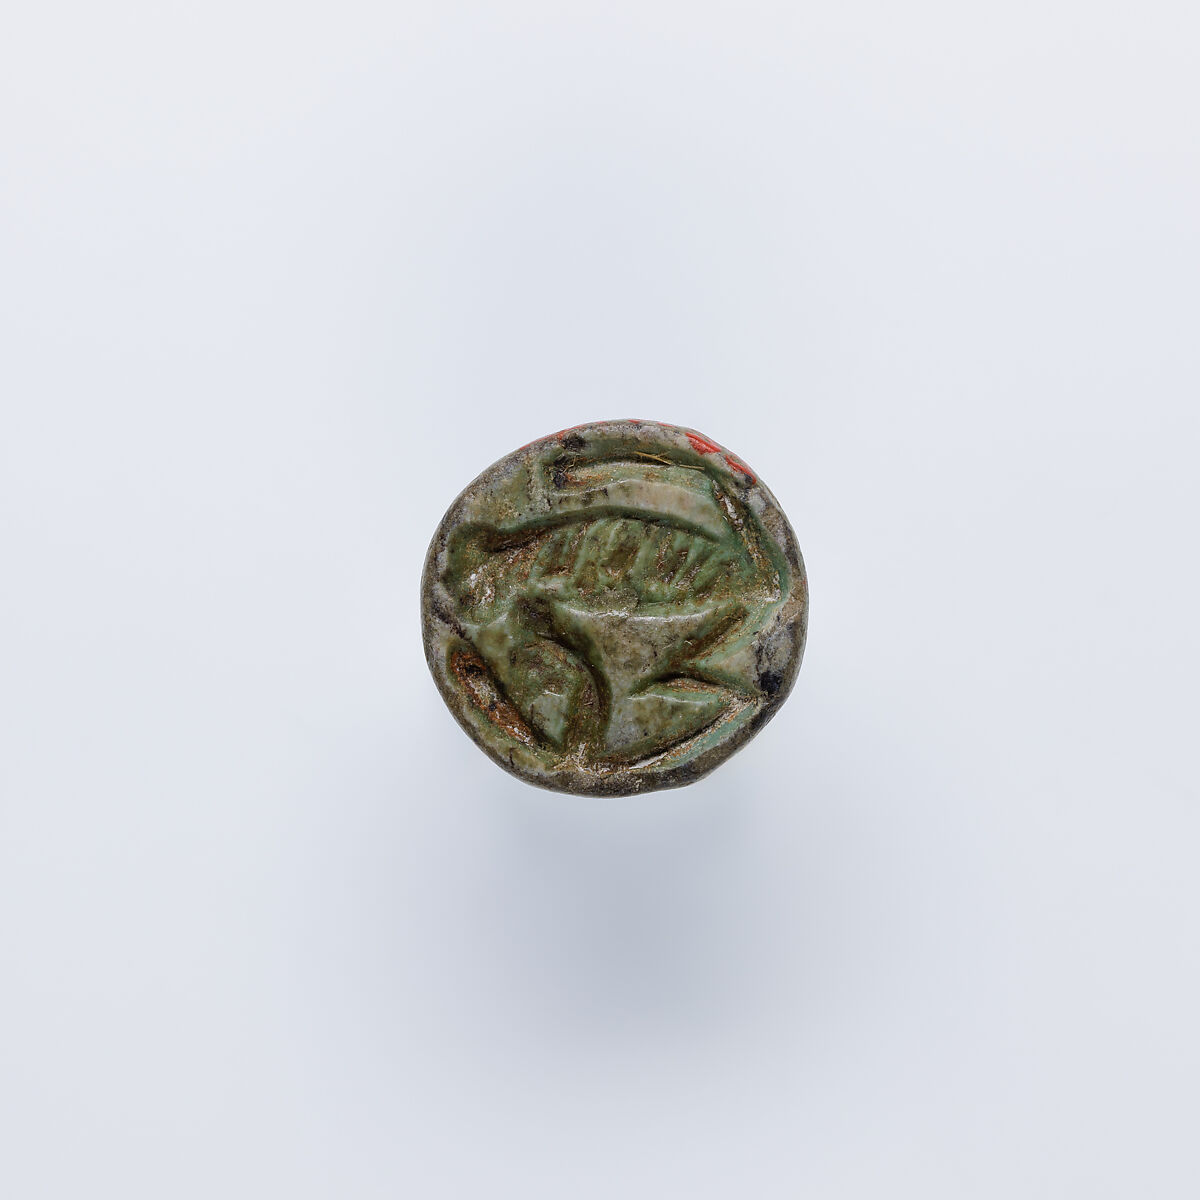 Design Amulet with a Hippopotamus (? ) Head on the Back Pierced for Stringing, and a Left-facing Monkey as the Device, Glazed steatite 